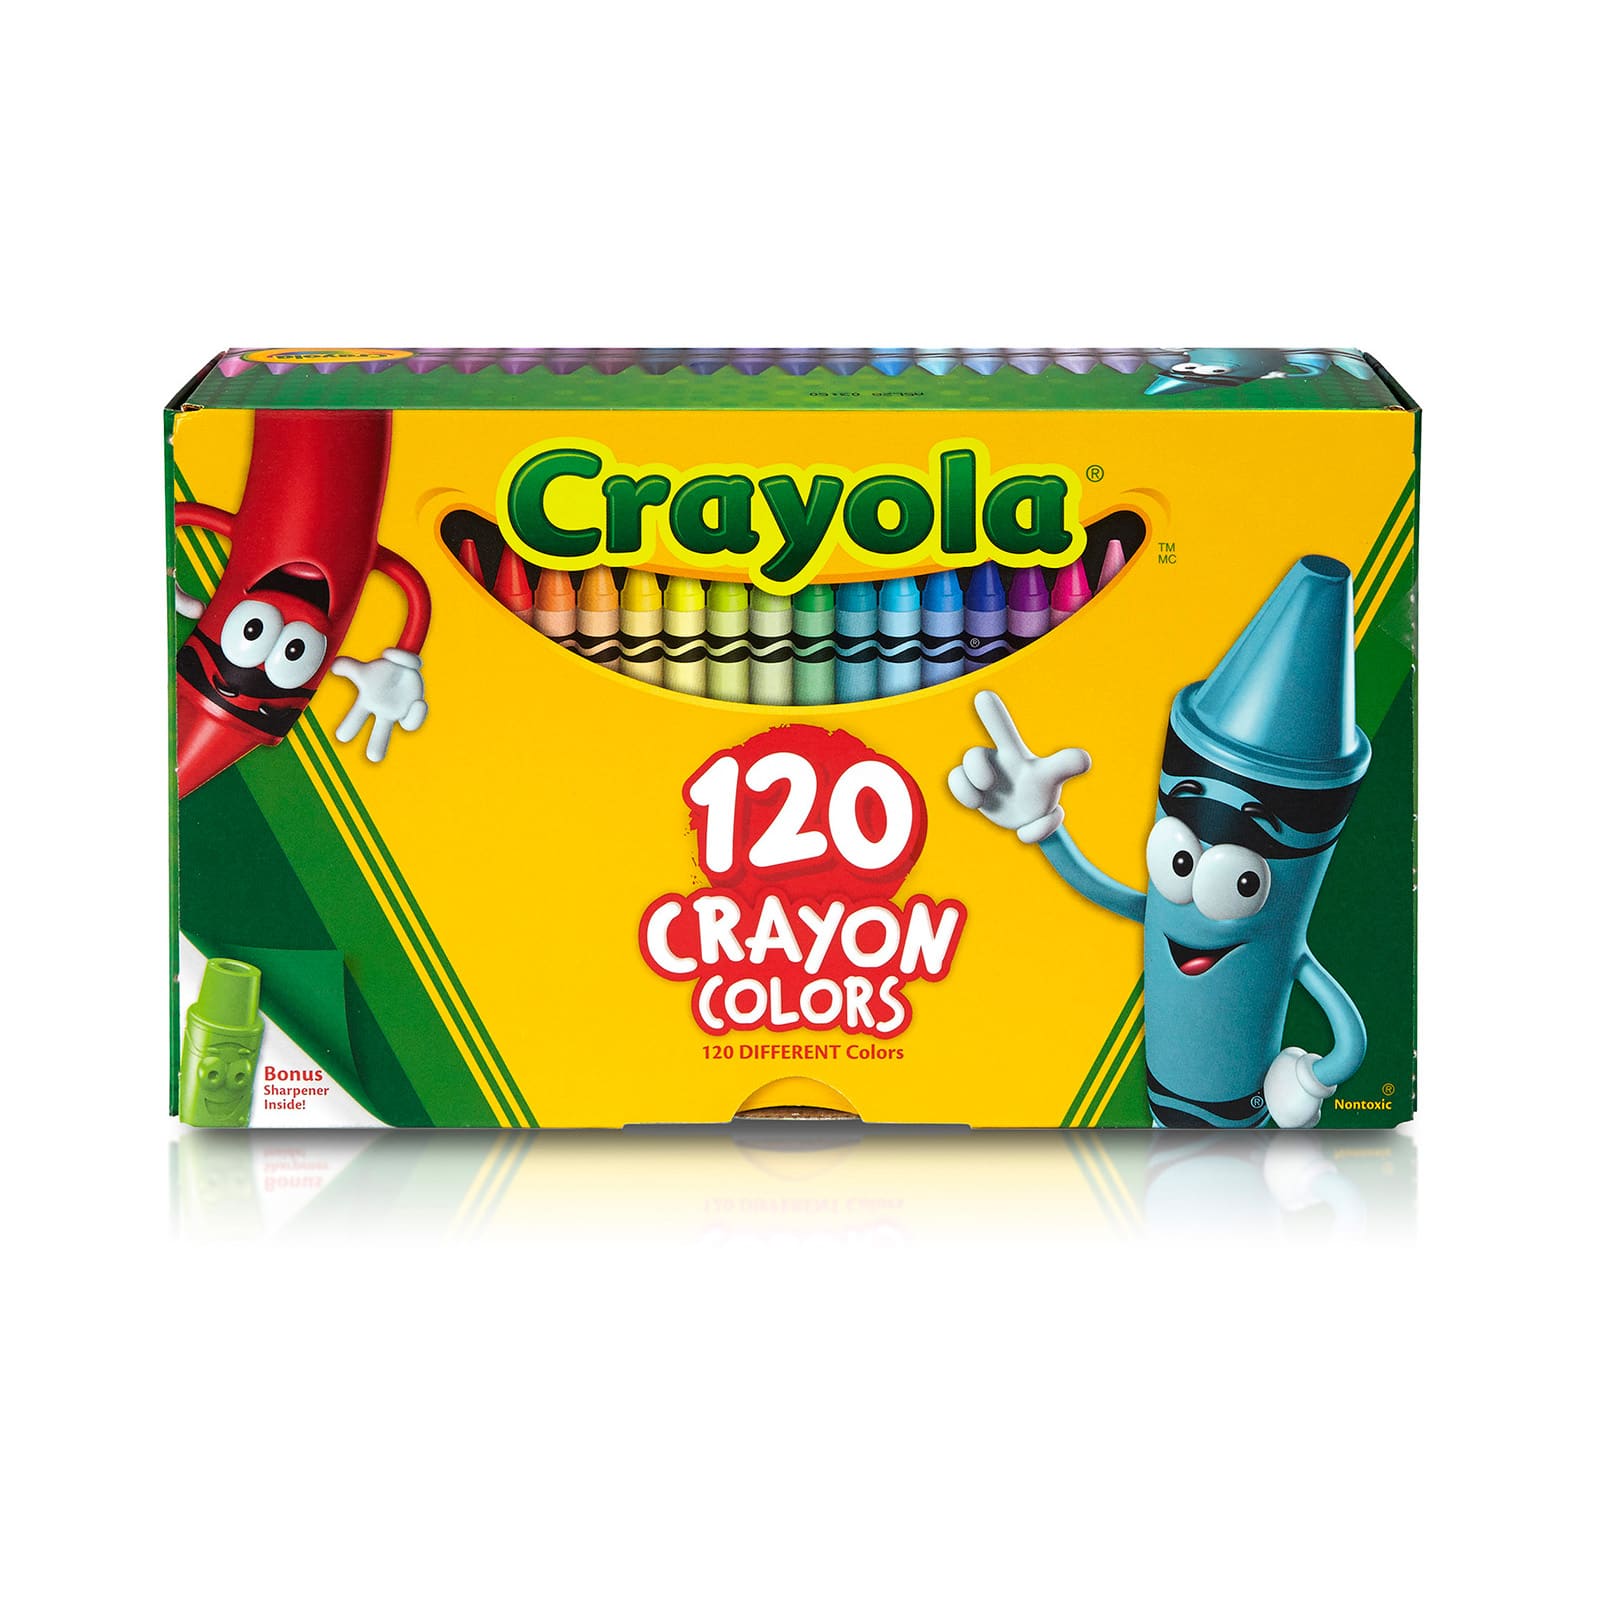 Crayola - Have the vibrant primary, secondary and intermediate colors with  the Crayola 120 crayons! #crayola #crayons #colors #art